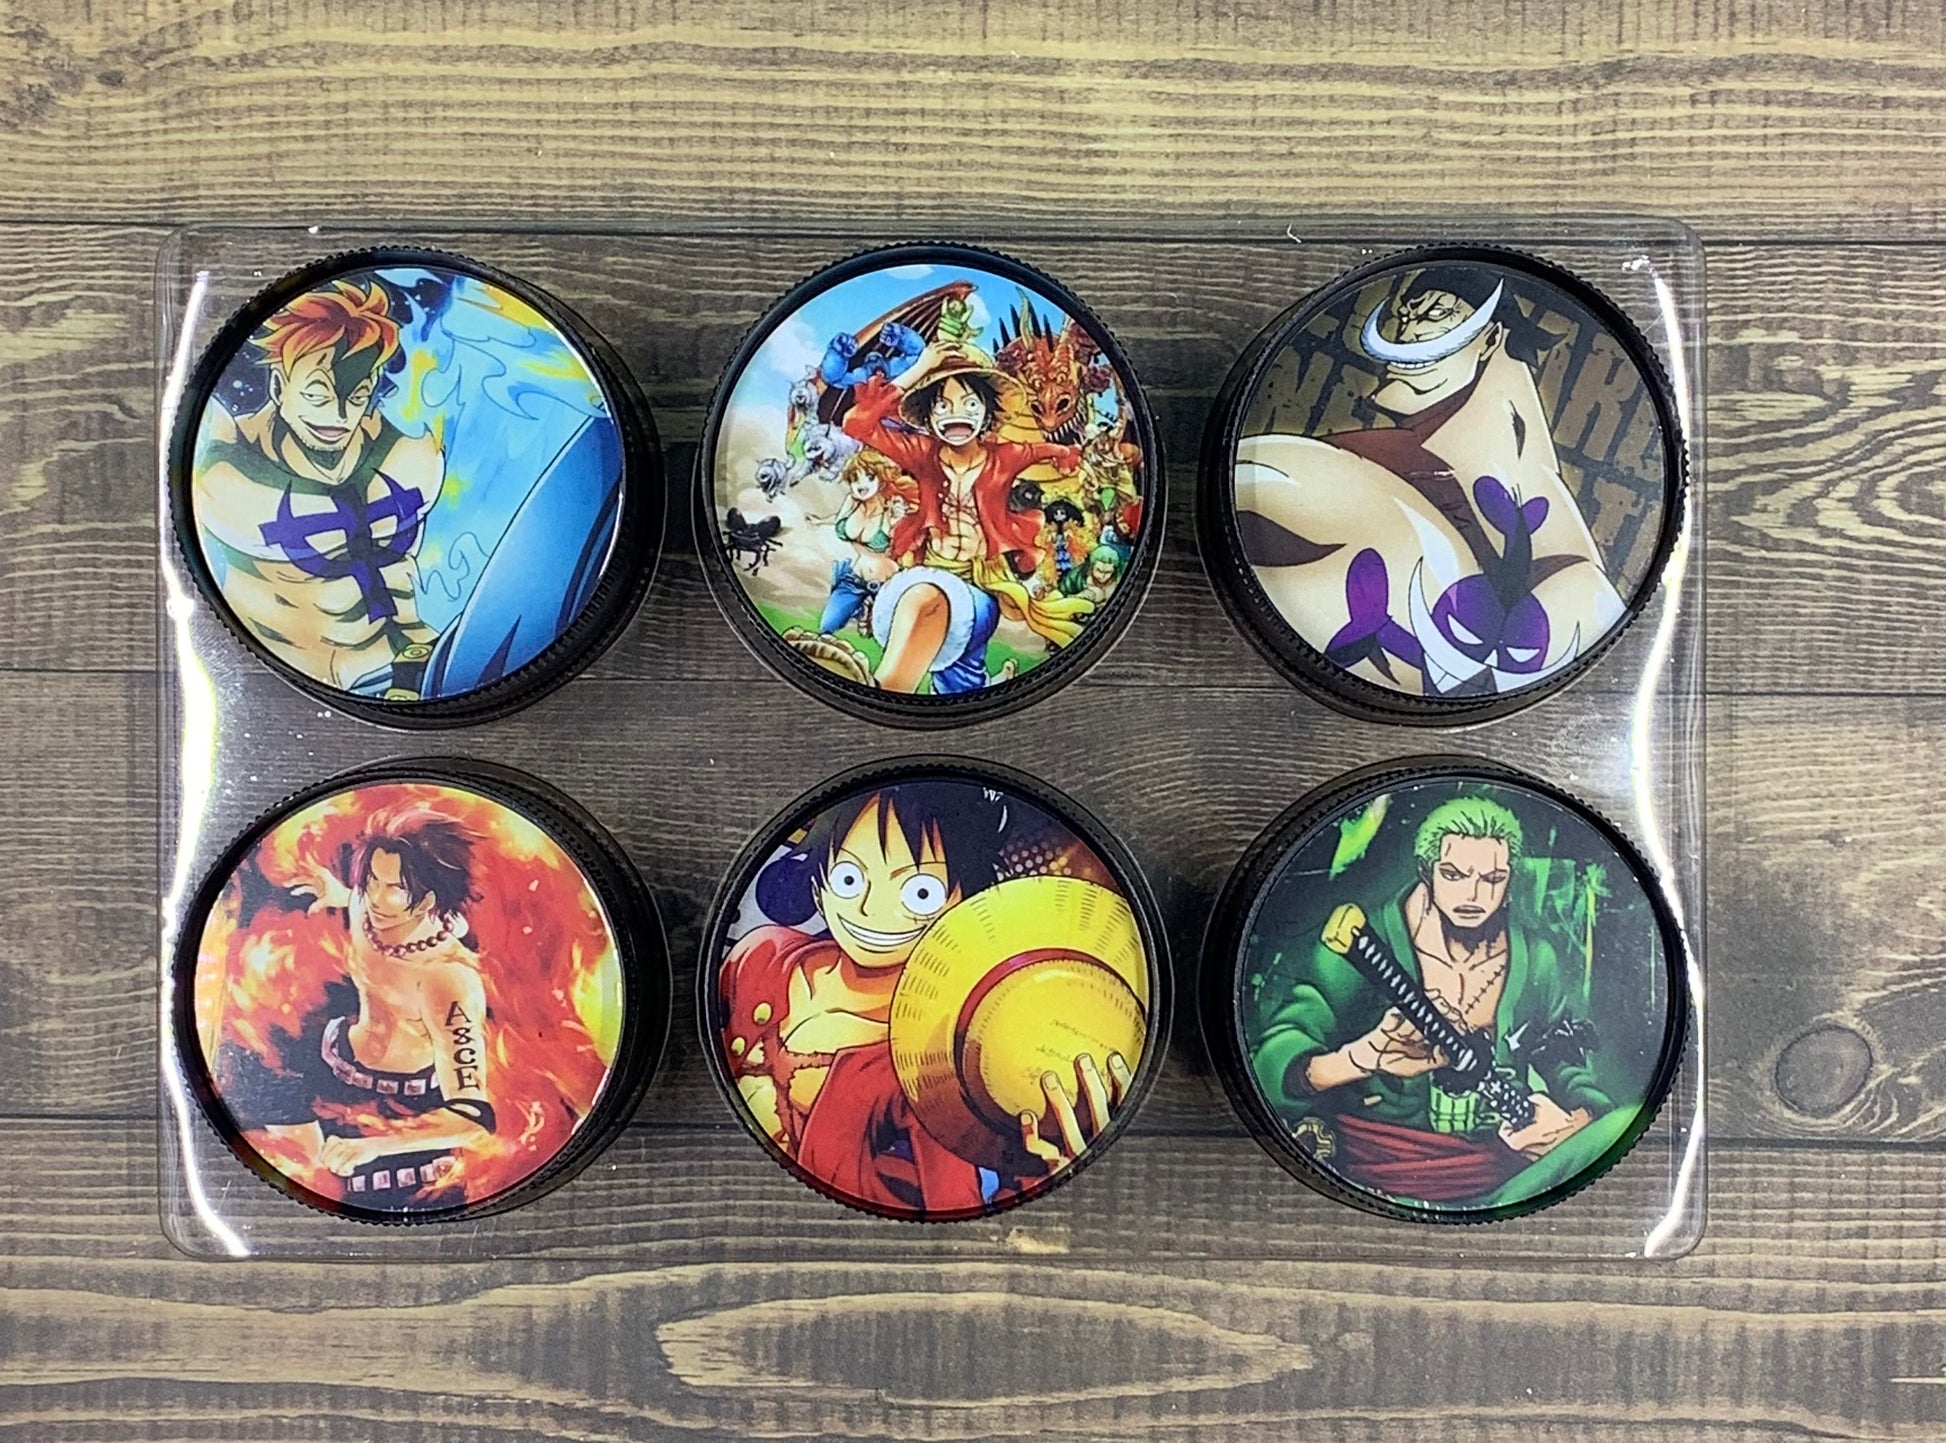 One Piece Character Small 2 Part Metal Grinder yoga smokes yoga studio, delivery, delivery near me, yoga smokes smoke shop, find smoke shop, head shop near me, yoga studio, headshop, head shop, local smoke shop, psl, psl smoke shop, smoke shop, smokeshop, yoga, yoga studio, dispensary, local dispensary, smokeshop near me, port saint lucie, florida, port st lucie, lounge, life, highlife, love, stoned, highsociety. Yoga Smokes